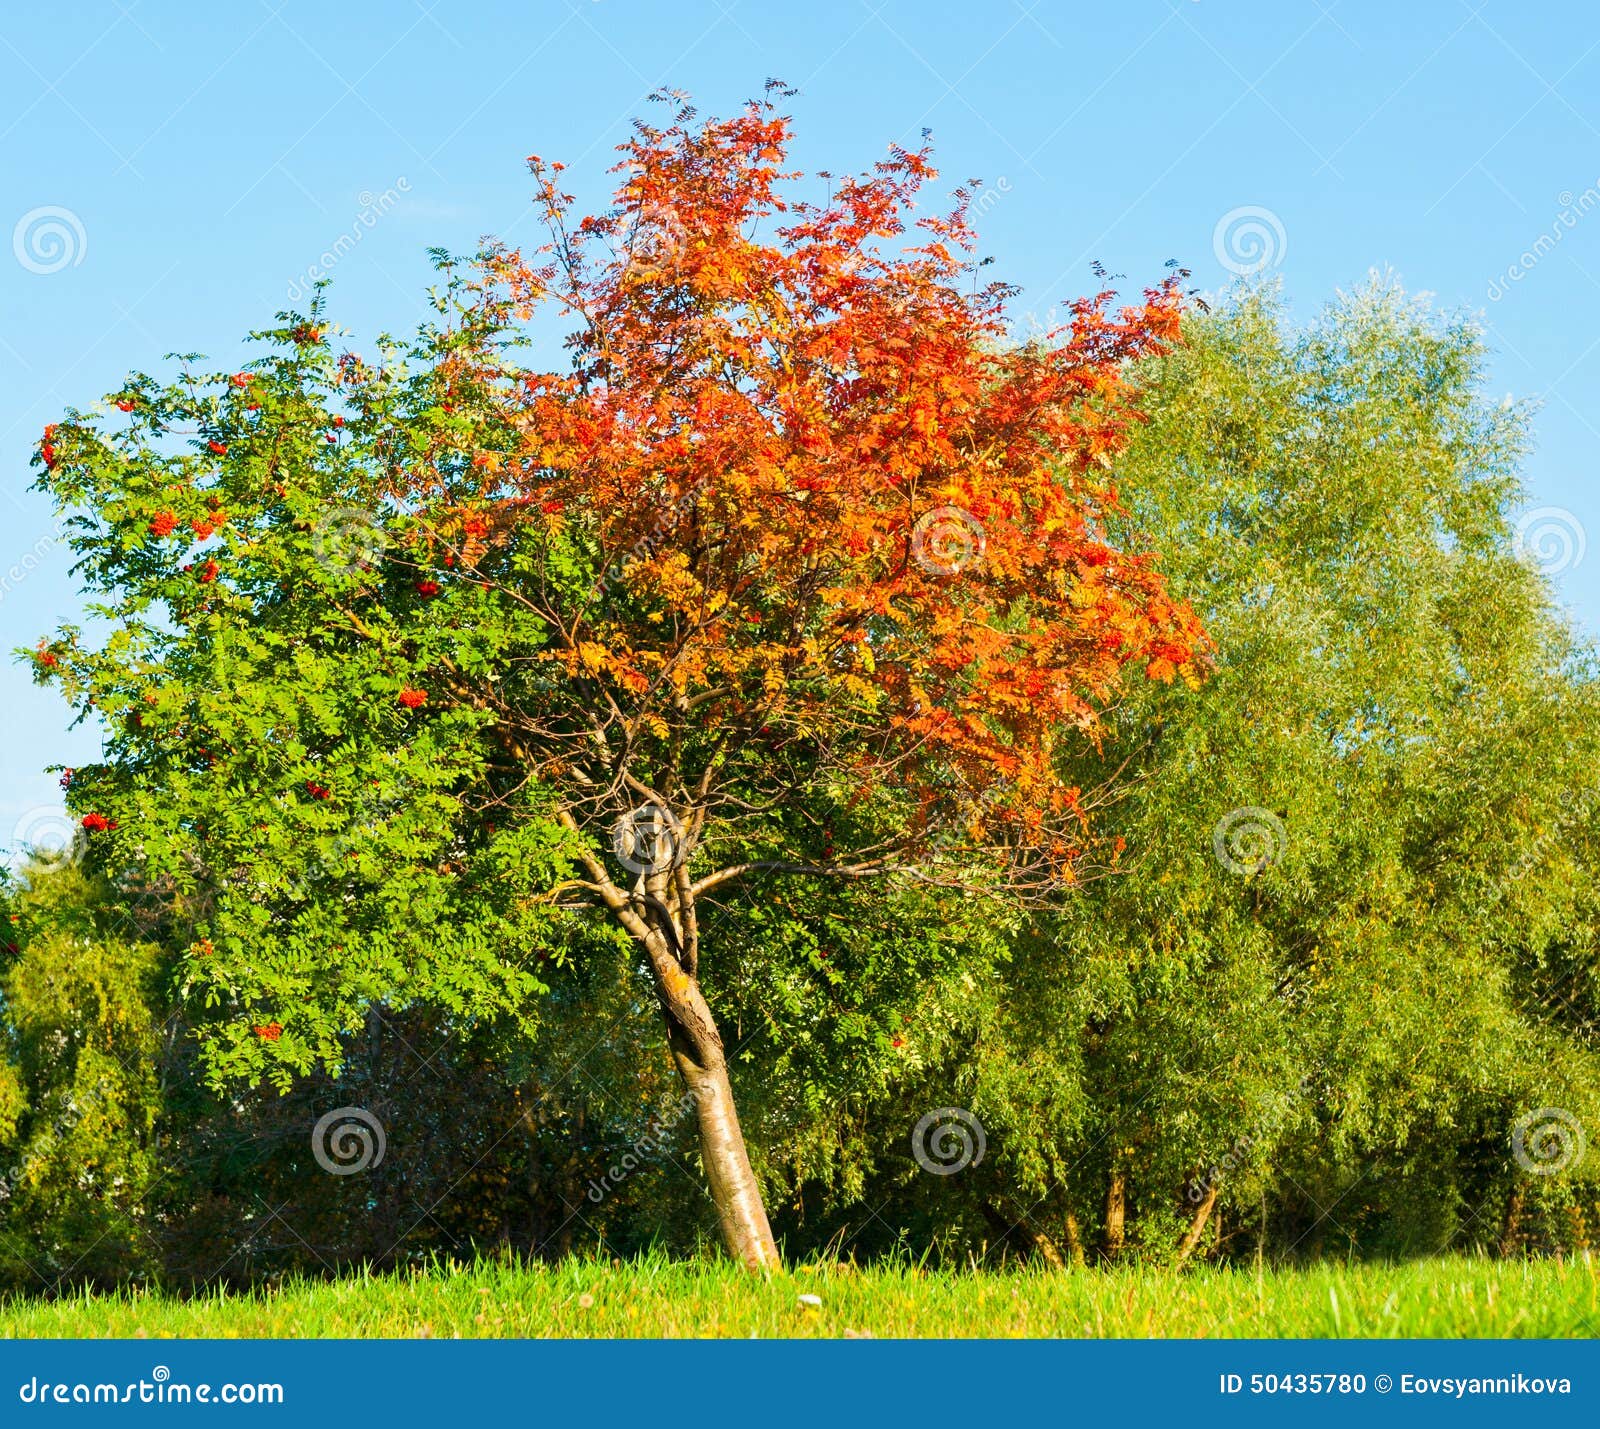 Summer And Autumn Seasons Red And Green Leaves Stock Photo Image Of Rowan Leaf